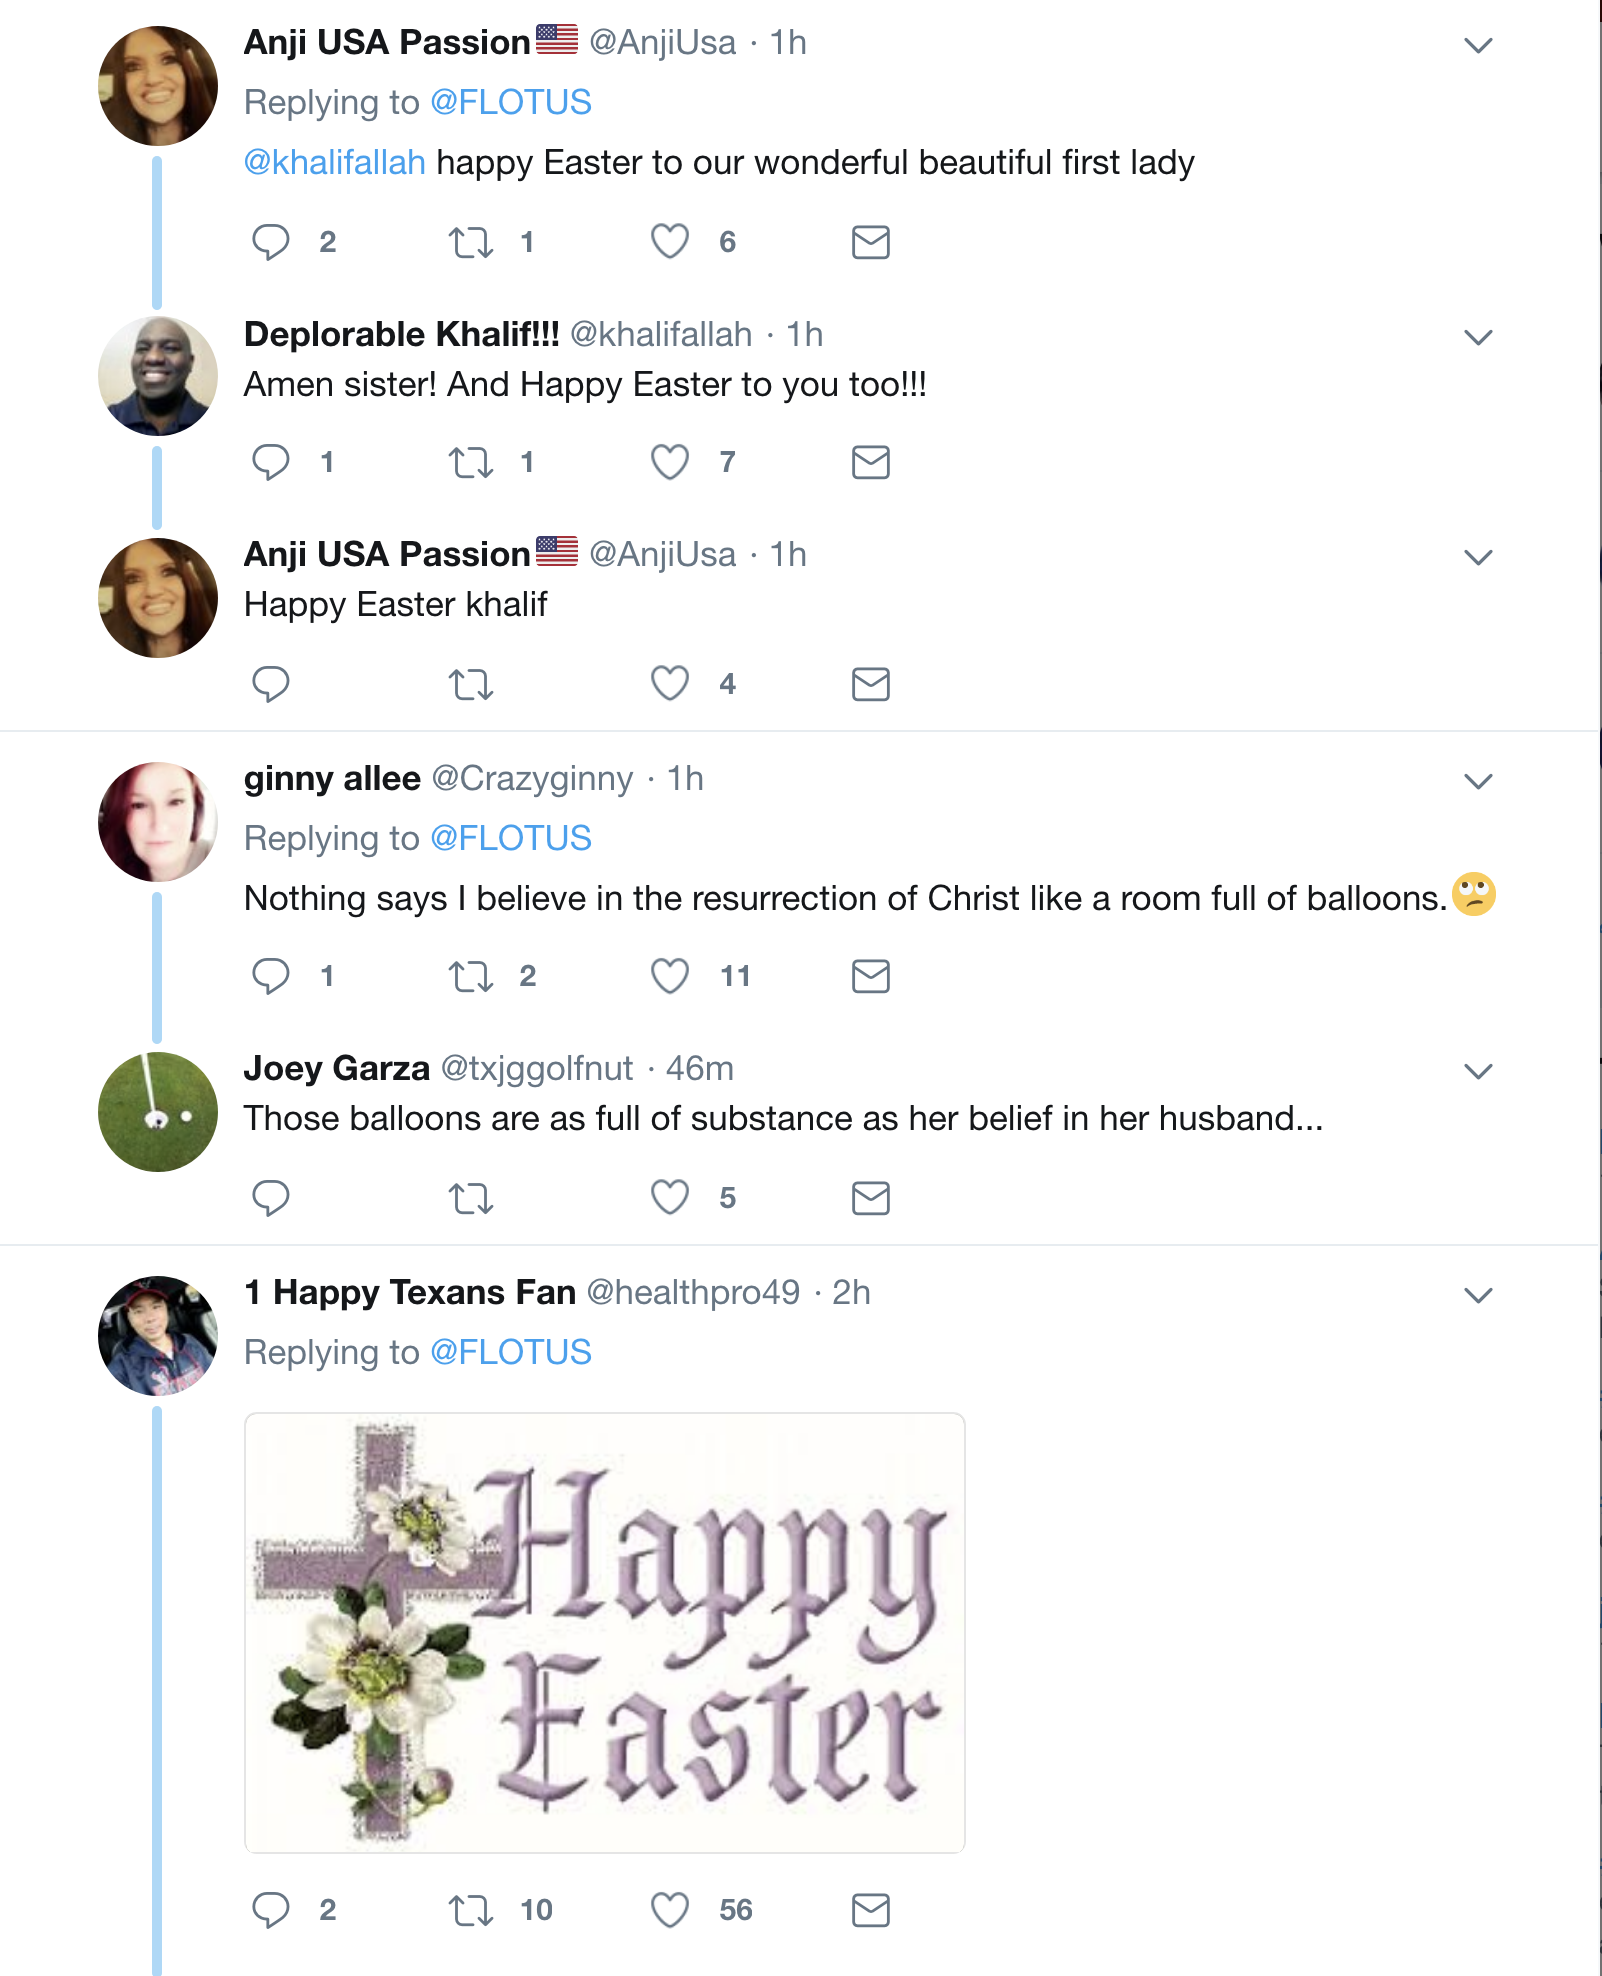 Screen-Shot-2018-04-01-at-2.04.30-PM Melania Just Released A Lame Easter Message & Deeply Regretted It In 4 Seconds Flat Donald Trump Politics Top Stories 